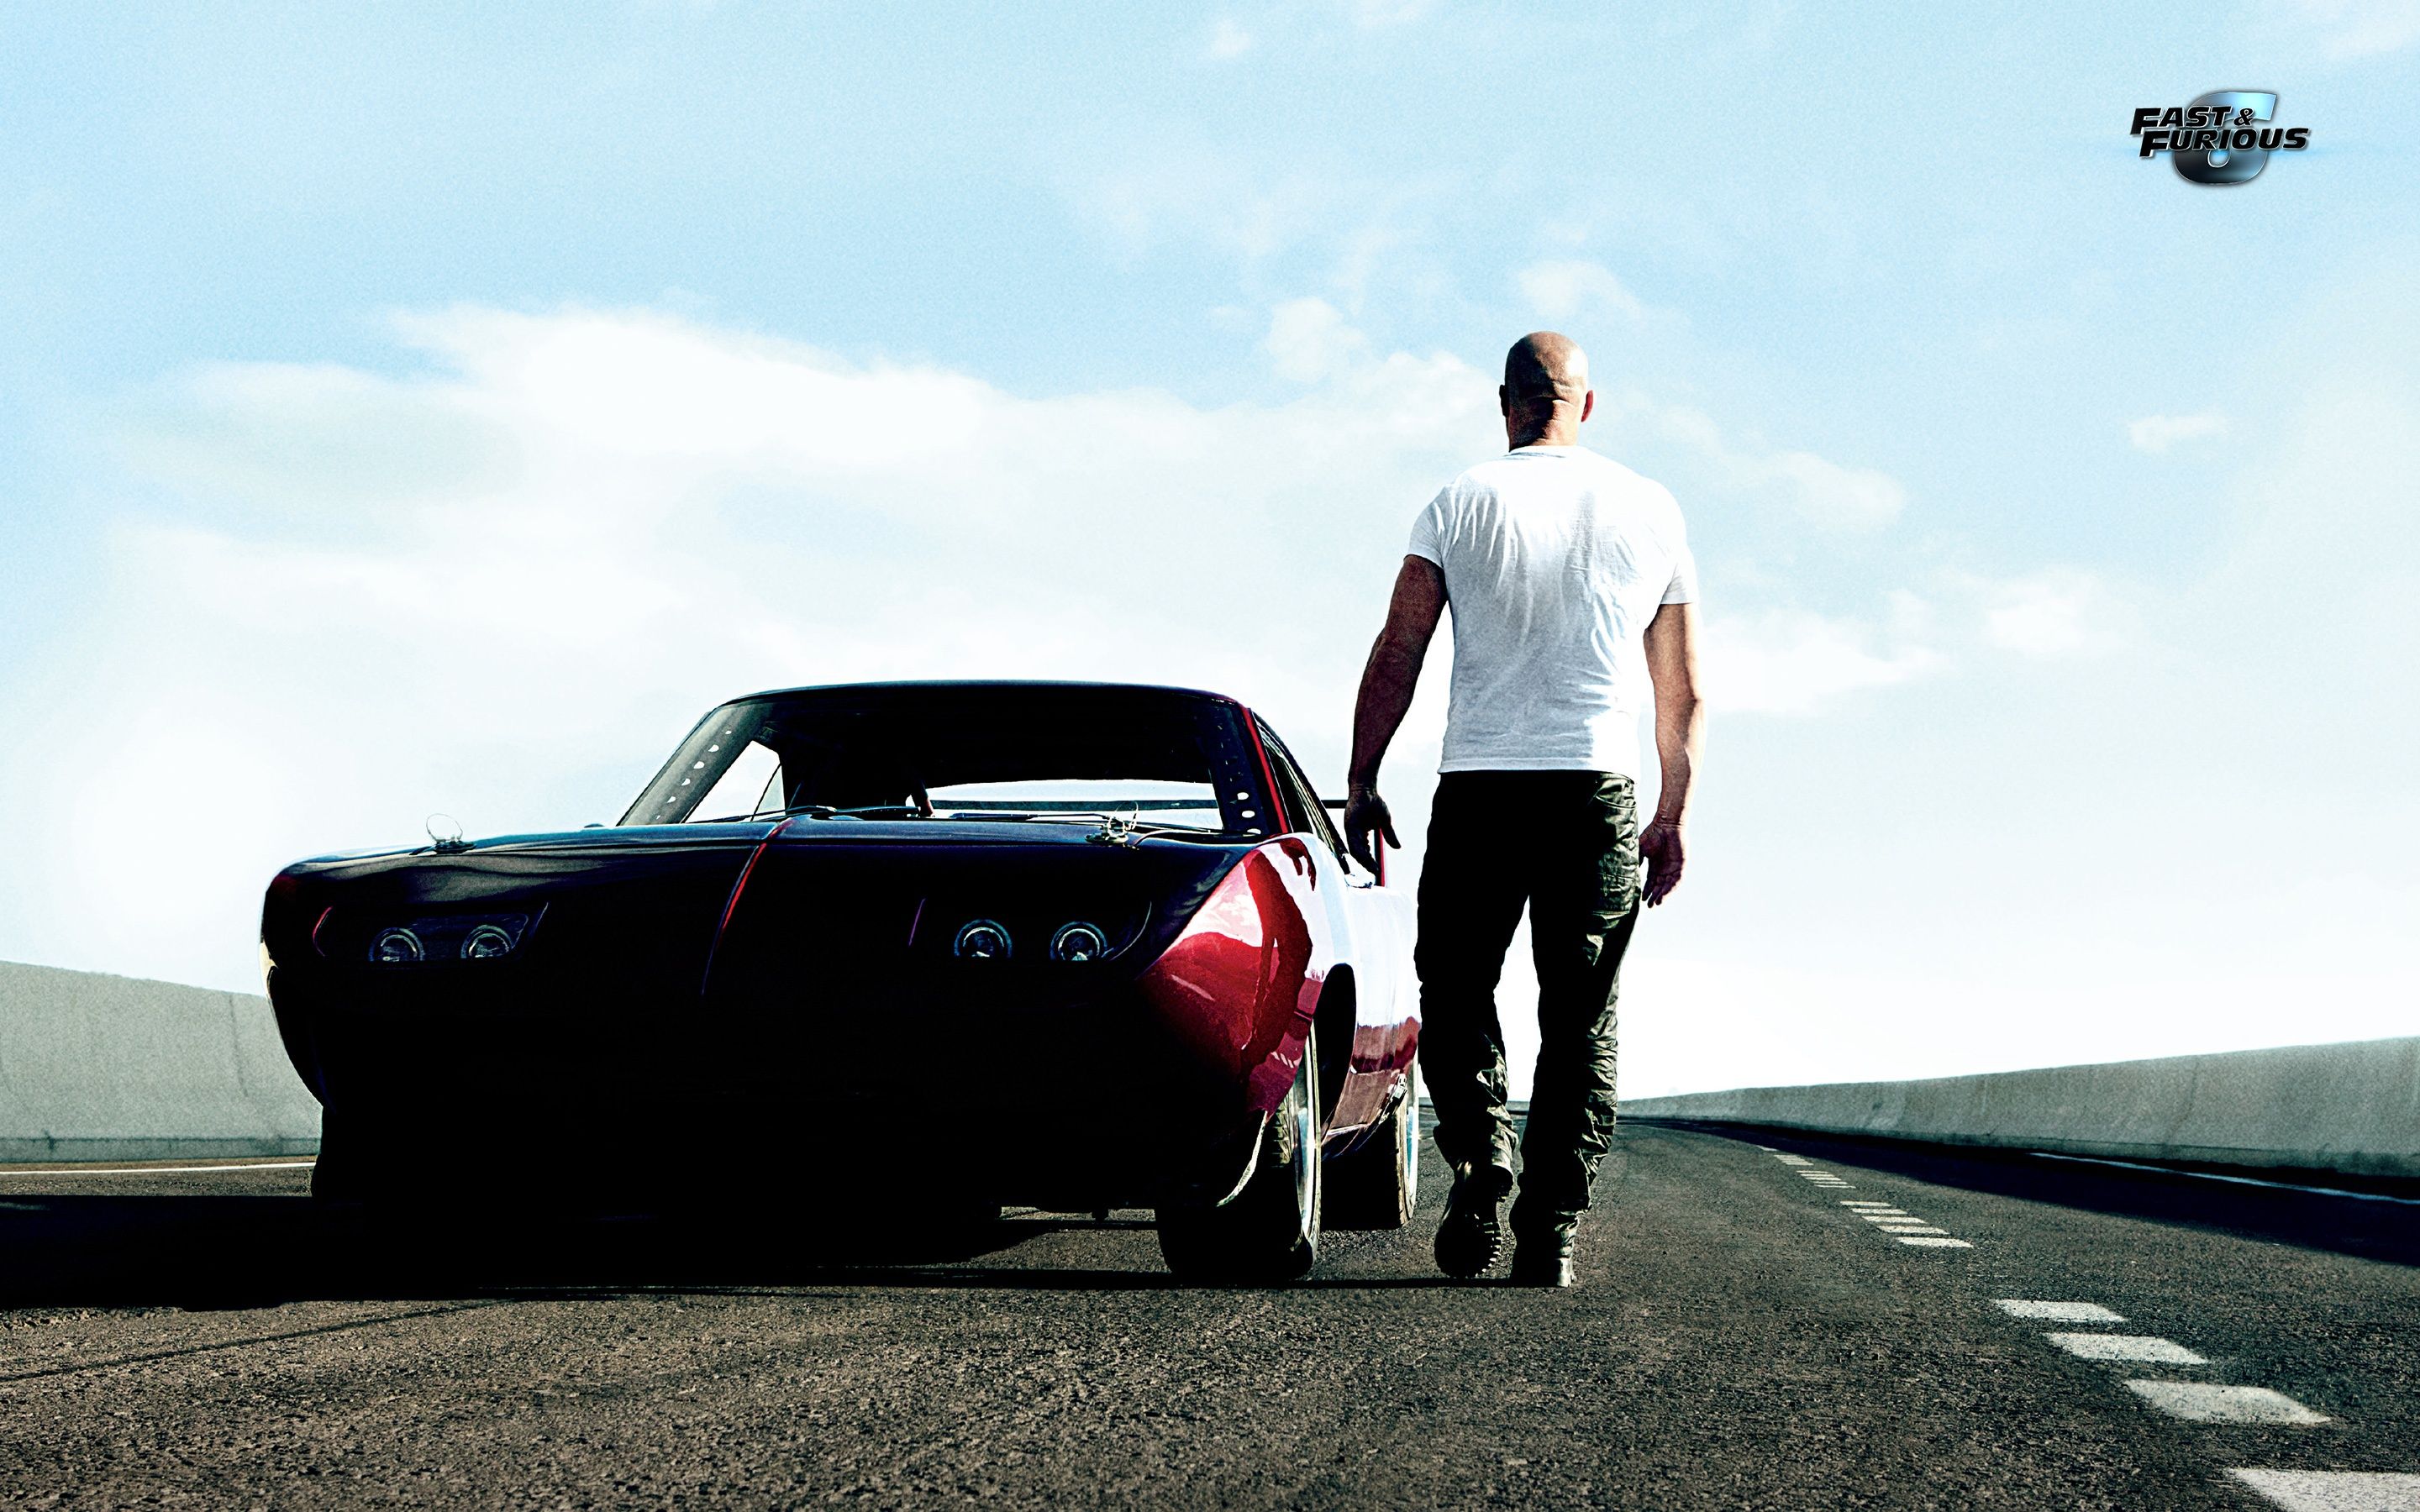 Detail Download Foto Mobil Fast And Furious Nomer 4